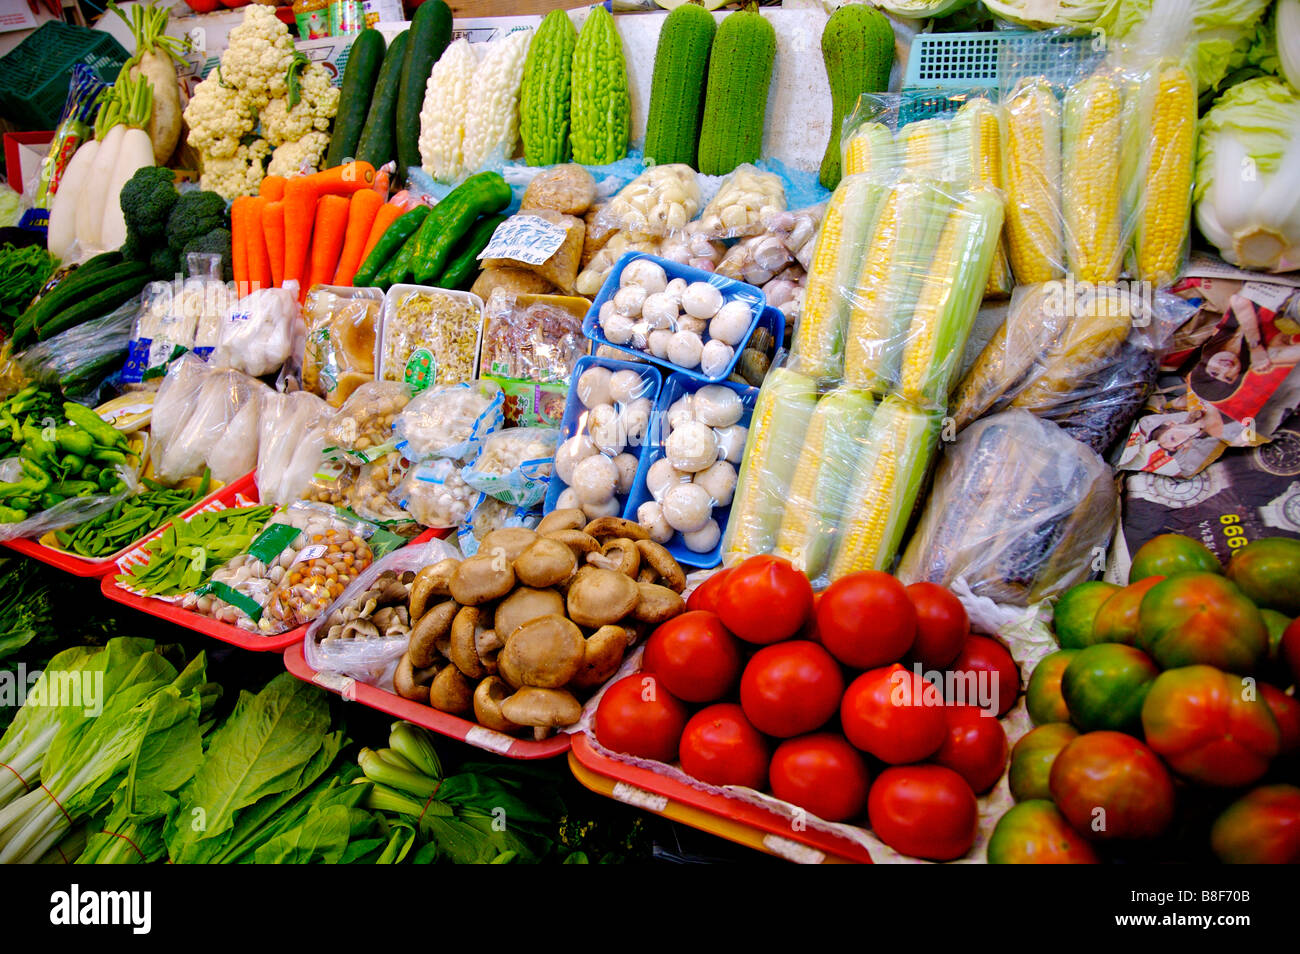 Different vegetables on display at a stall in a market Stock Photo